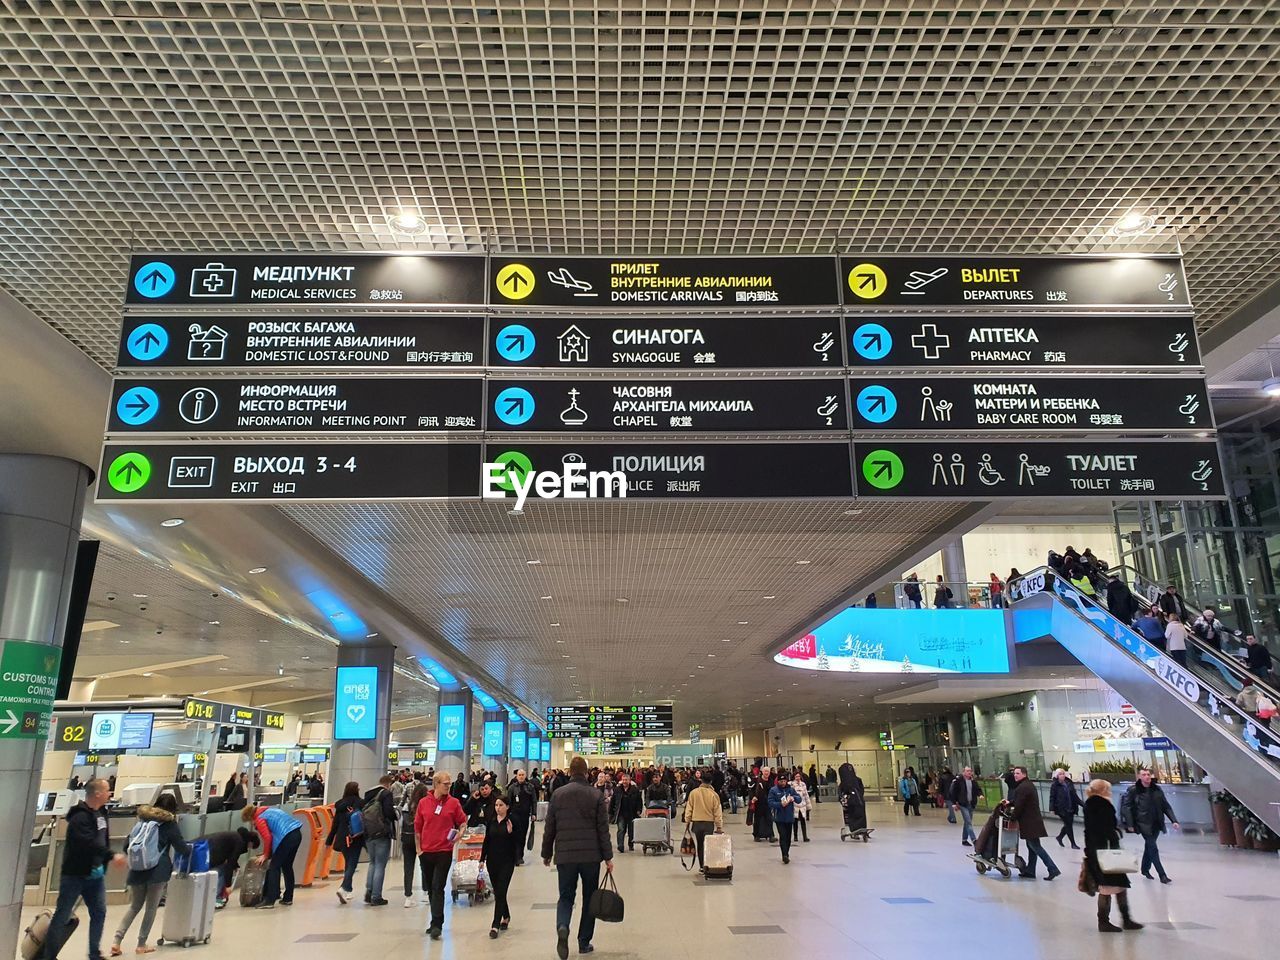 travel, crowd, large group of people, group of people, transportation, sign, airport, architecture, infrastructure, communication, journey, airport terminal, travel destinations, arrival departure board, guidance, information sign, directional sign, city, text, tourism, walking, built structure, indoors, arrow symbol, mode of transportation, airport departure area, city life, railroad station, holiday, airport check-in counter, passenger, public transport, men, illuminated, trip, vacation, motion